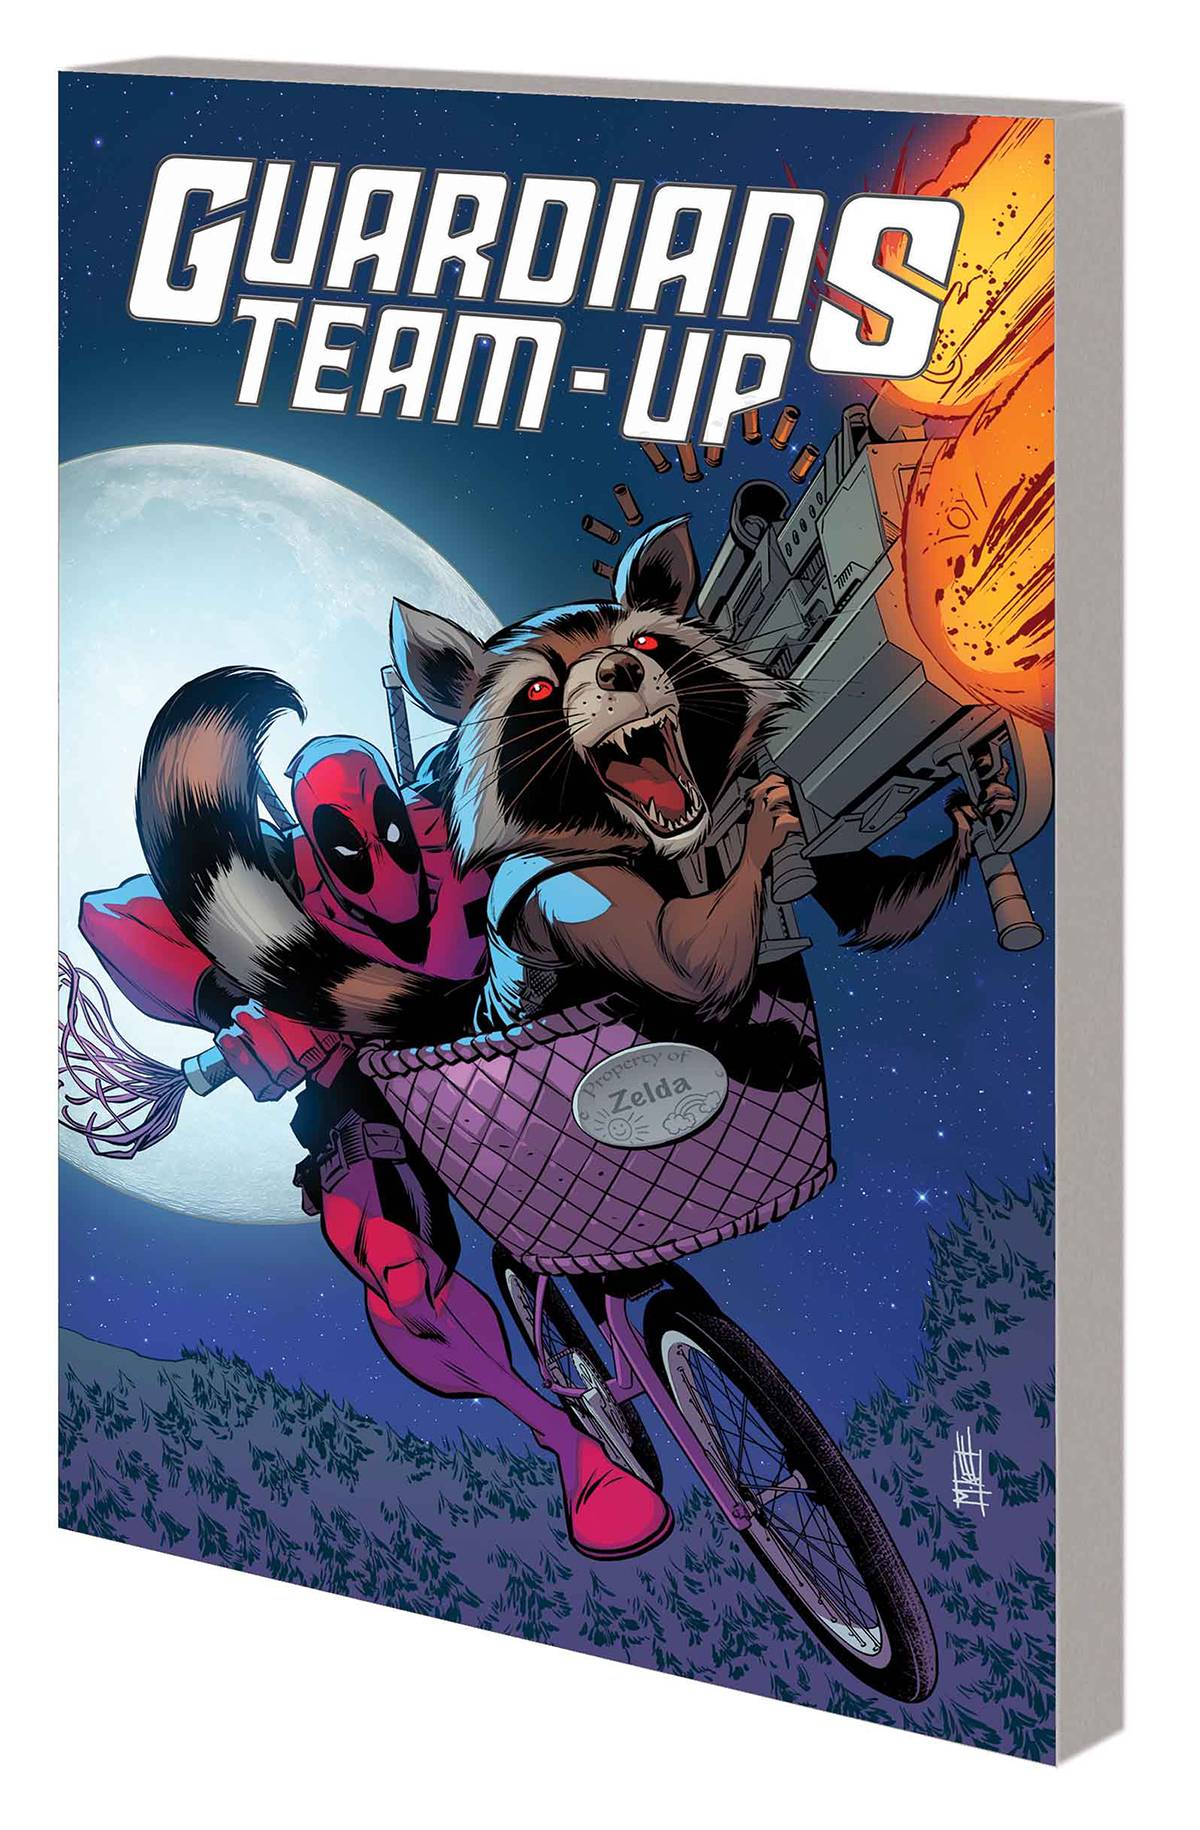 Guardians Team-Up Graphic Novel Volume 2 Unlikely Story